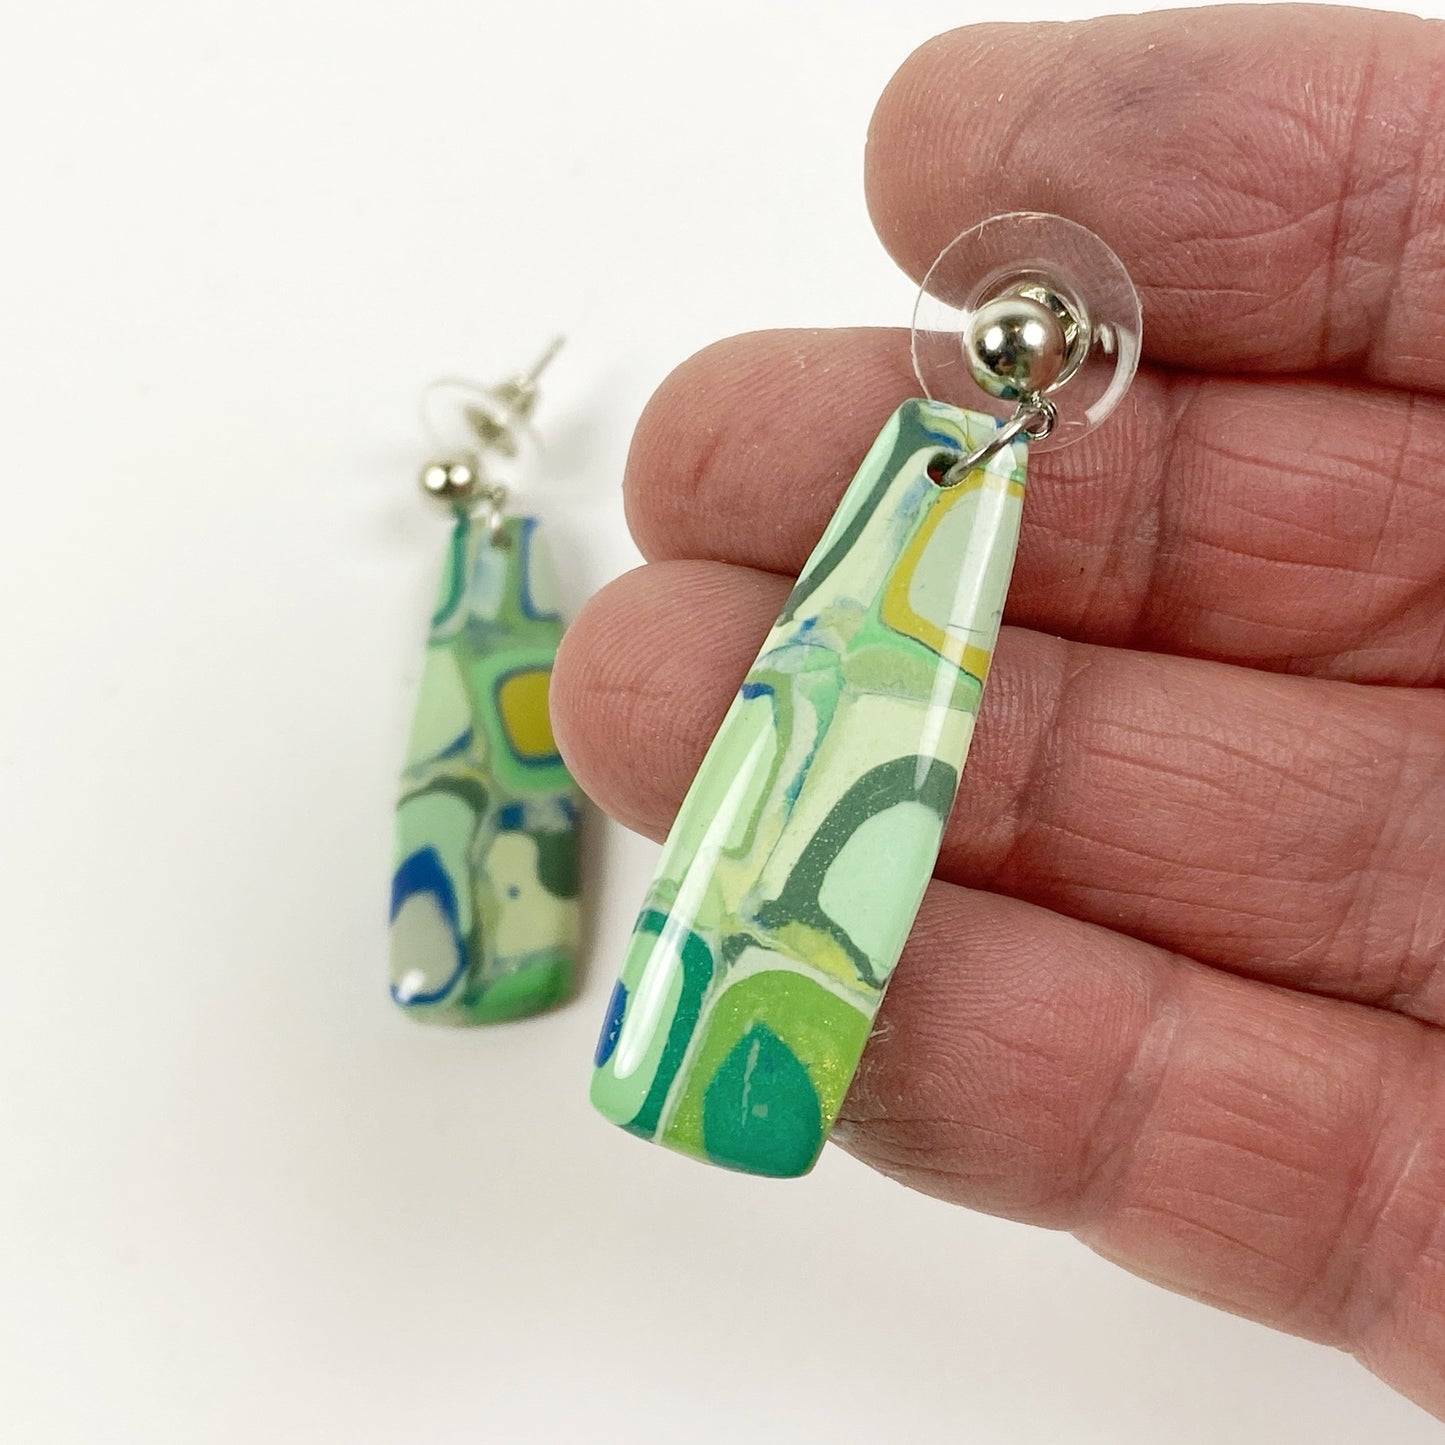 Squares of Green Polymer Clay Handmade Dangle Earrings handheld for size reference